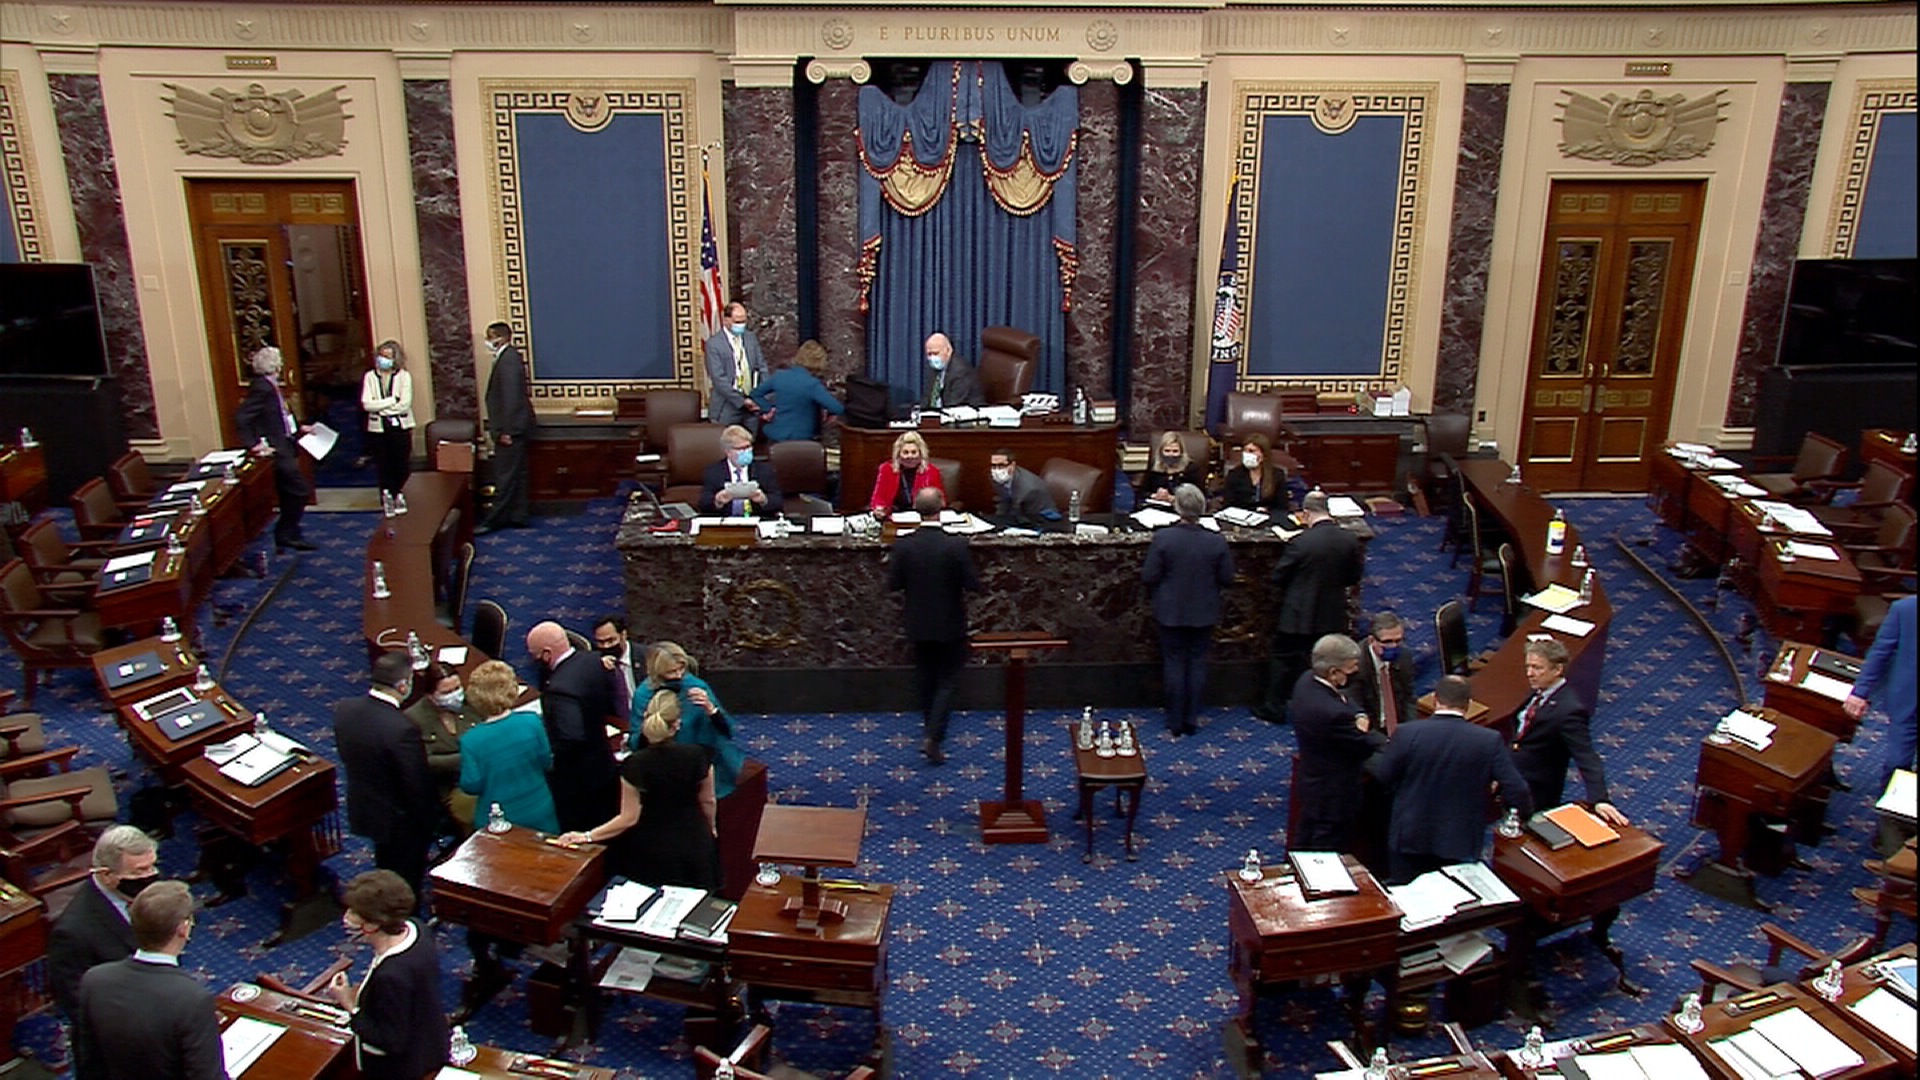 Here S What S Happening On The Senate Floor Now Following The Witness Vote